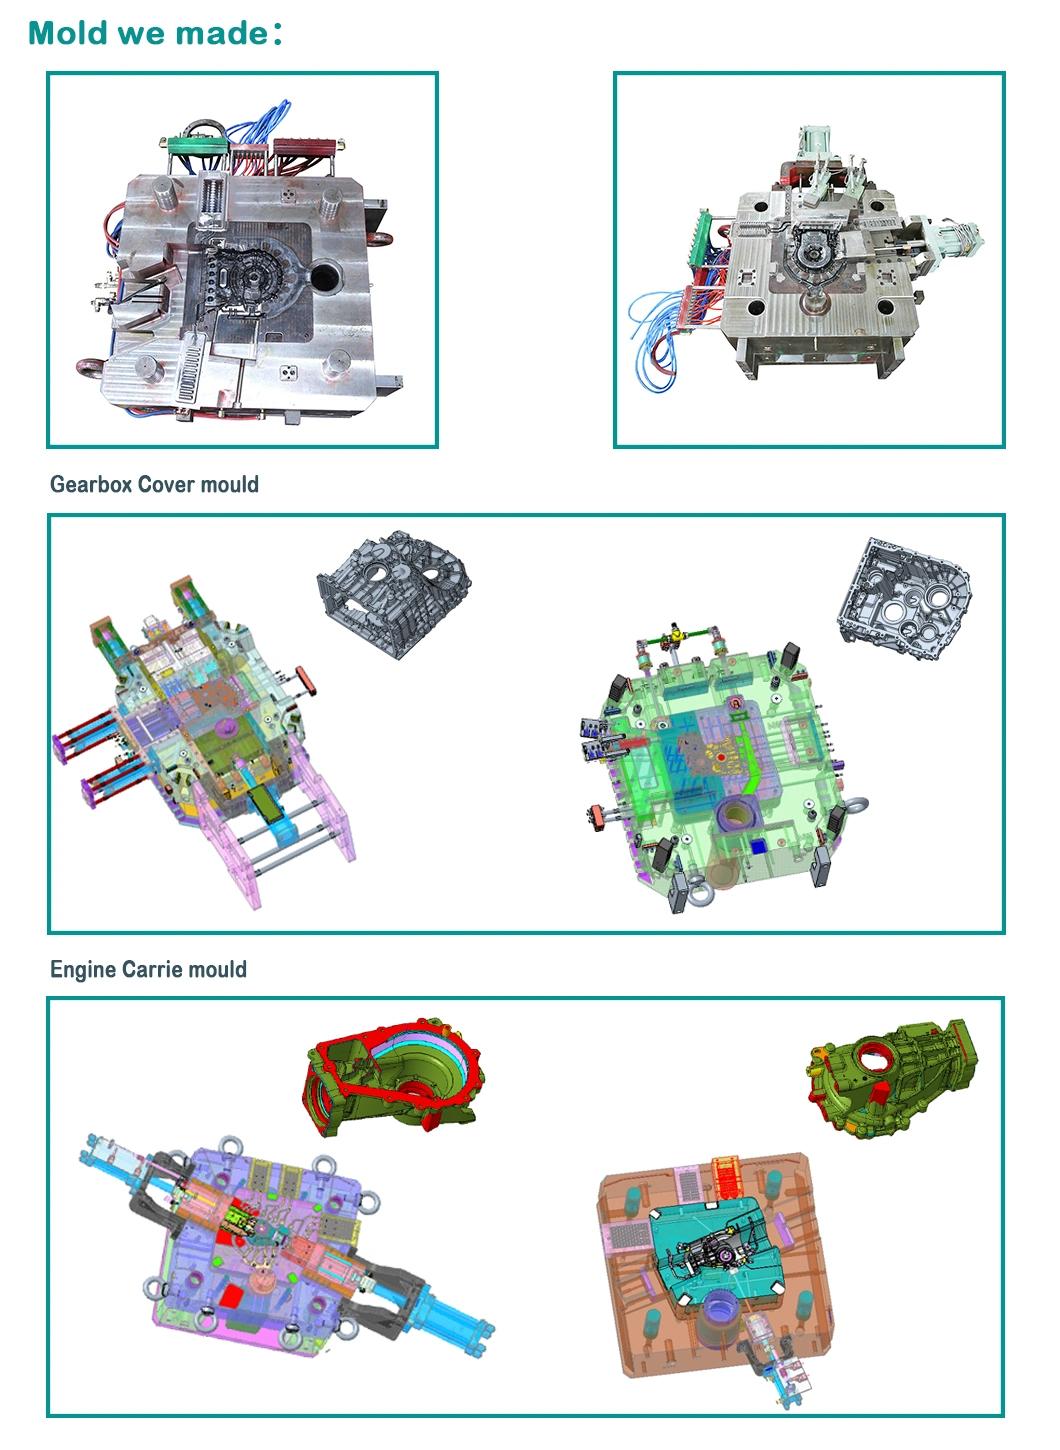 Competitive Complex Plastic Injection Mold Metal Injection Molding Aluminium Die Casting Die Aluminium Mold Design for Engine Carrier Gear Housing Gearbox Cover